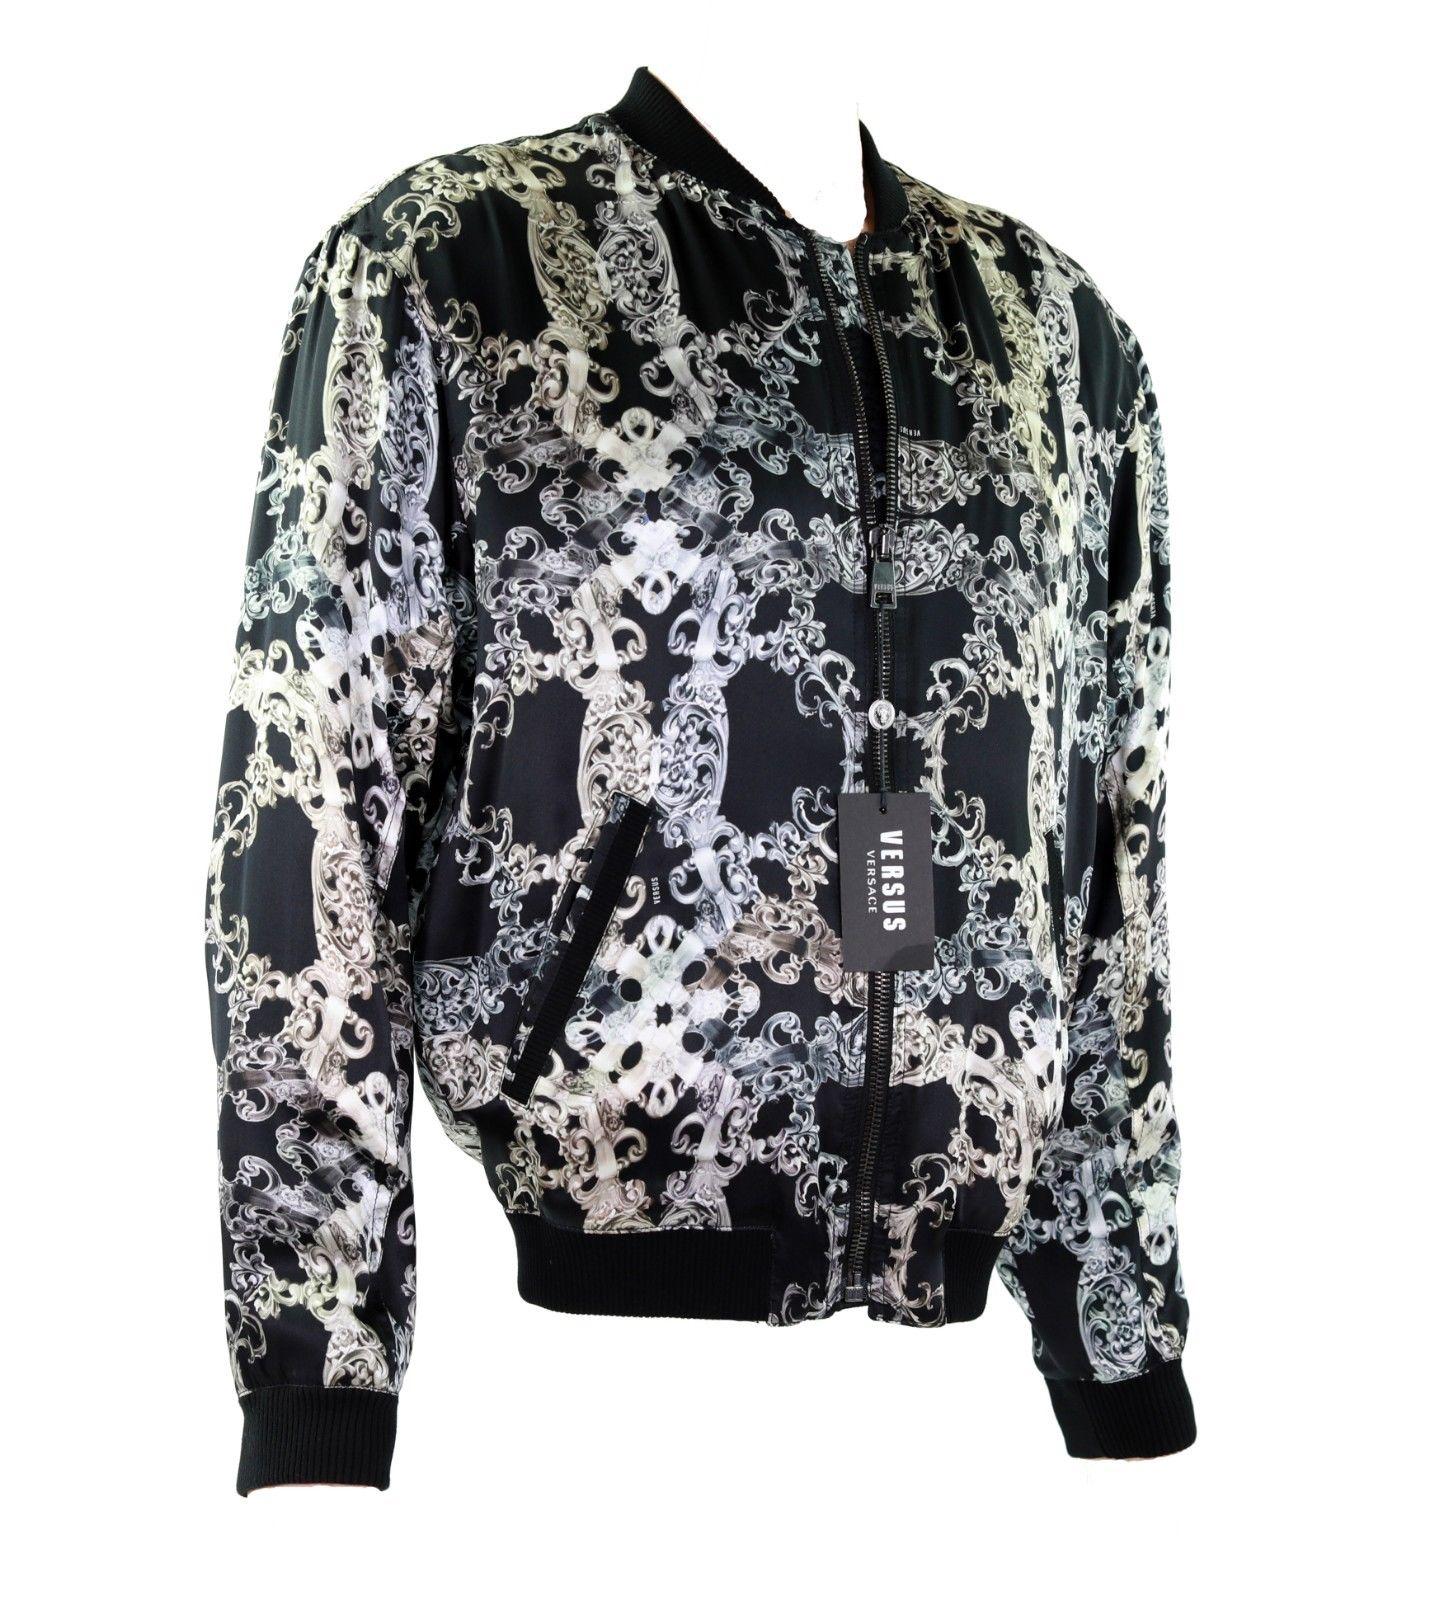 VERSACE  

Printed silk jacket. 
Lightly padded.

This cover-up echoes a classic masculine style and shows how 
Versace reinterprets iconic pieces of a man's wardrobe season after season.

Italian size is 48 - US 38

Shell: 100% Silk

Brand new.